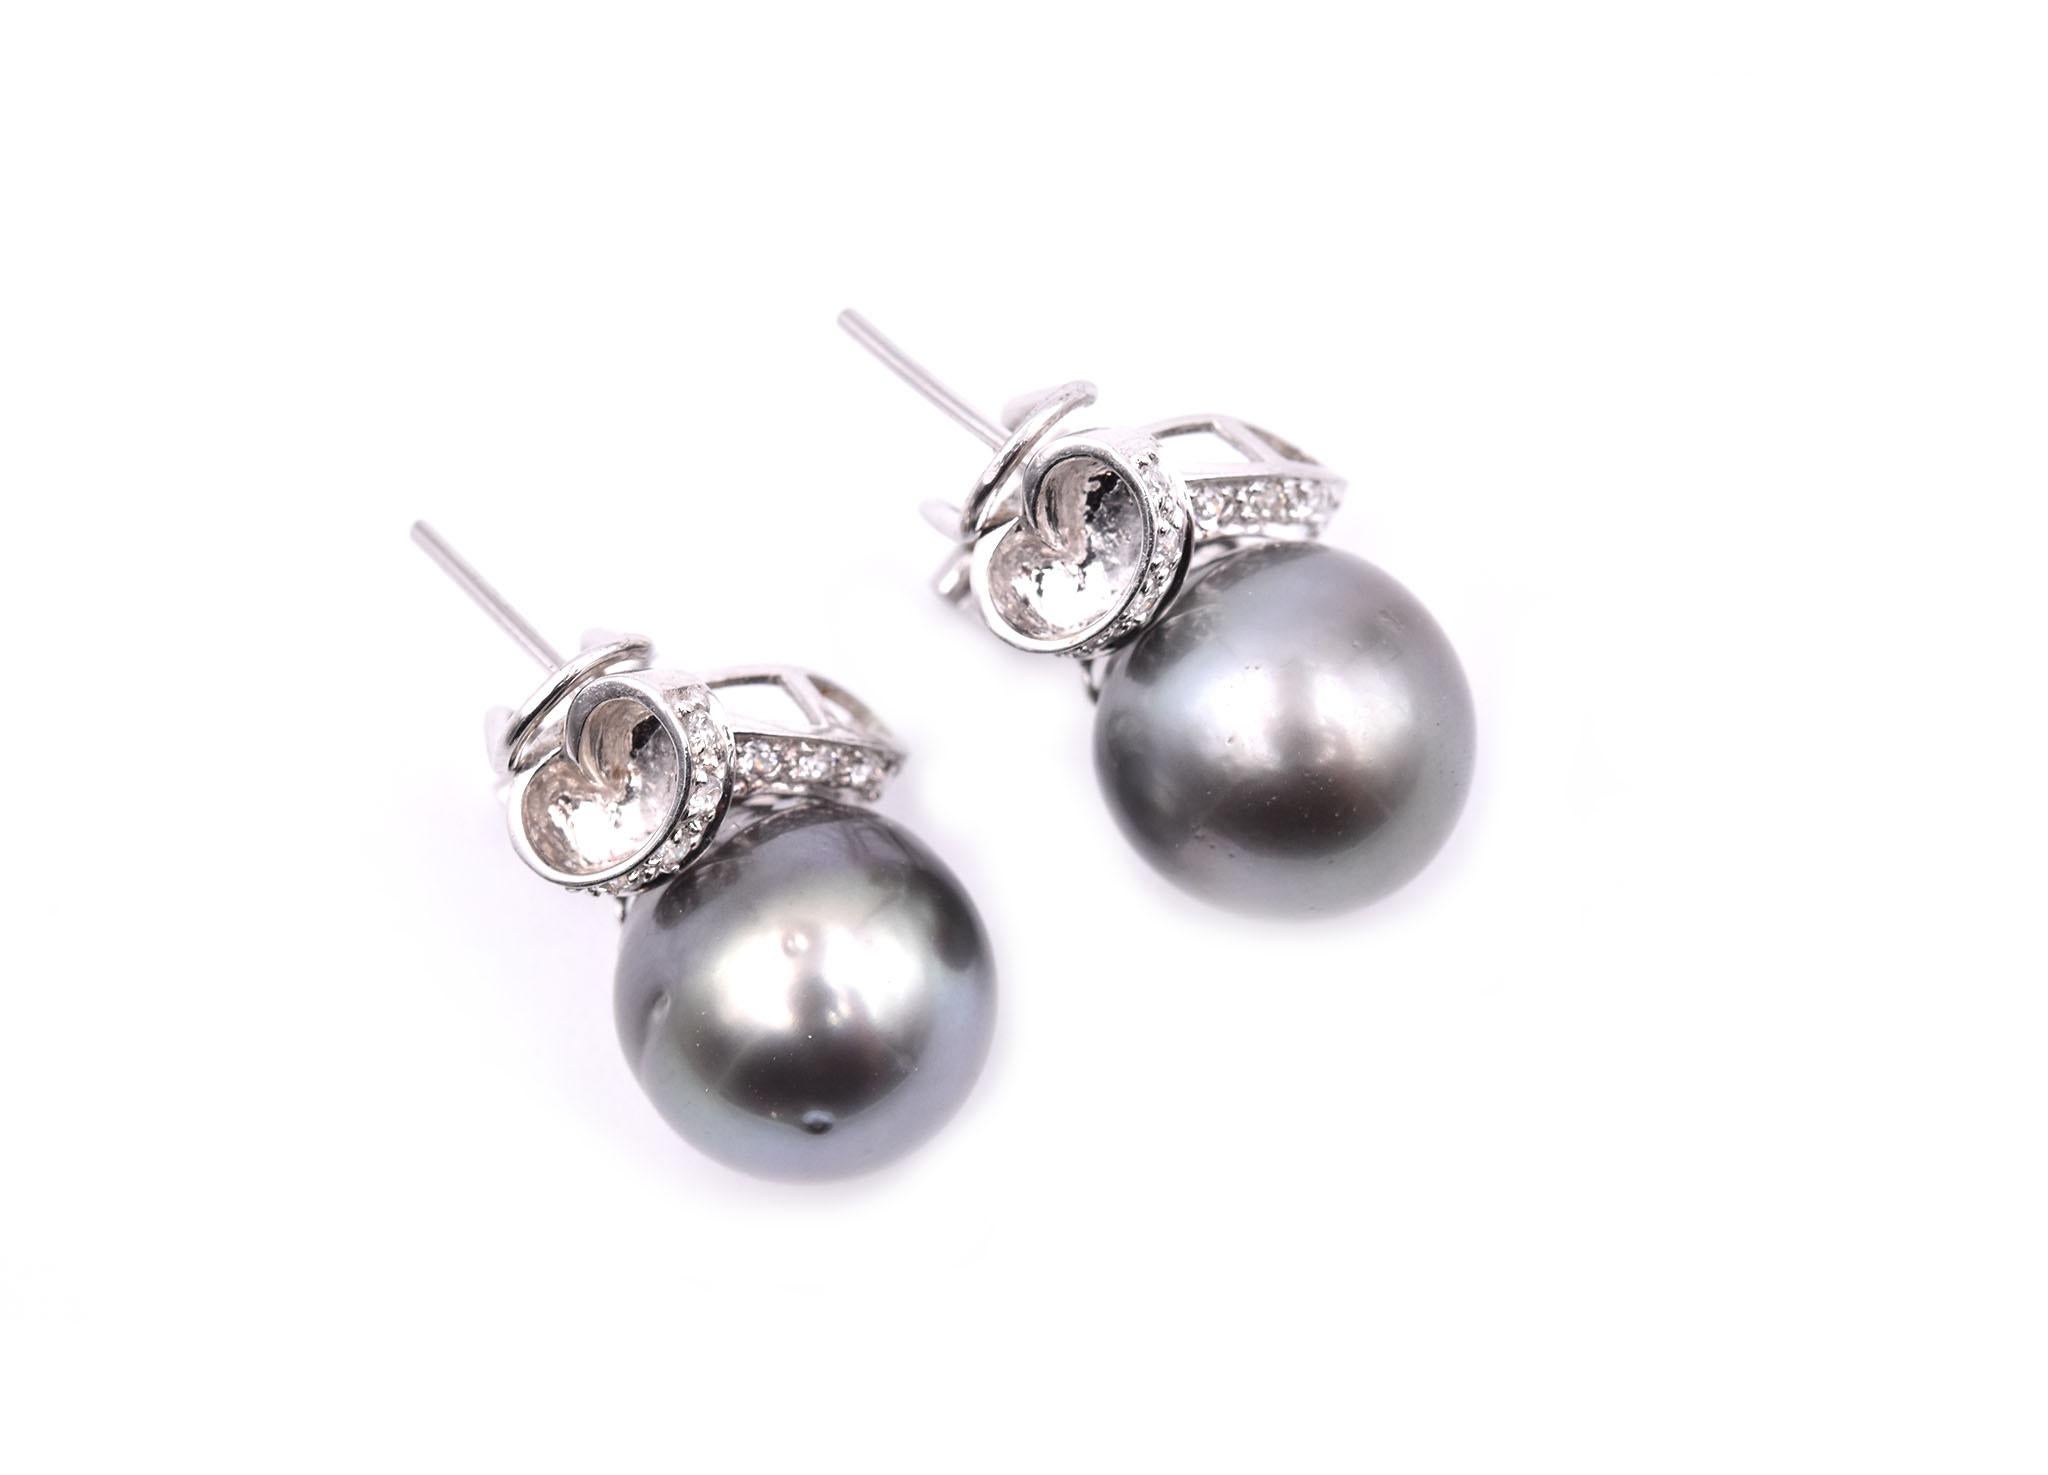 Designer: custom design
Material: 14k white gold
Pearls: 2 pearls approximate diameter is 12.25mm
Diamonds: 18 round brilliant cut= 0.10cttw 
Color: G
Clarity: VS
Fastenings: post with omega backs
Dimensions: earring are approximately 16.25mm in